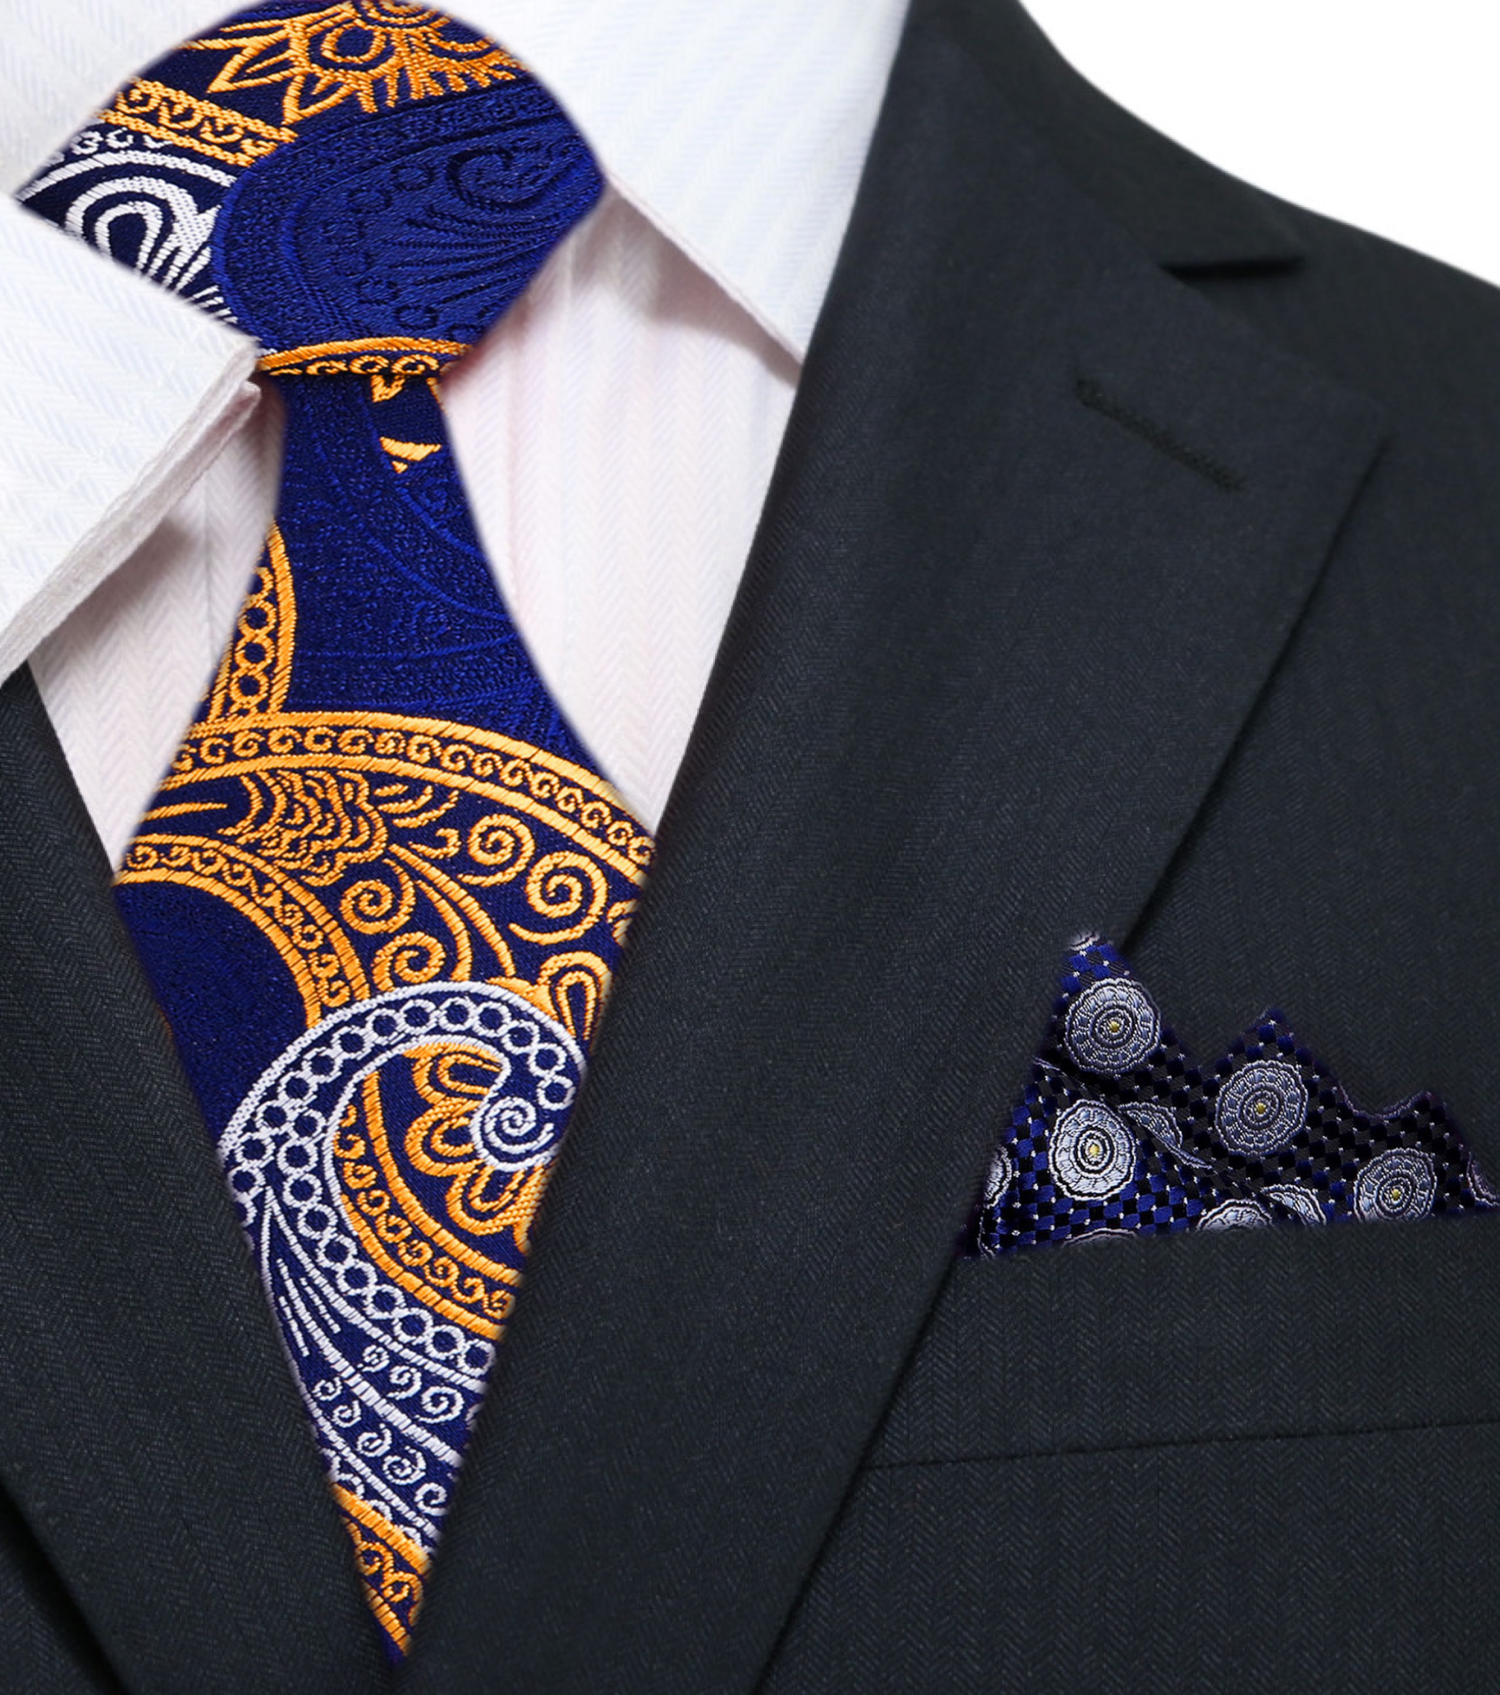 Main: Blue, Yellow Gold, White Paisley Tie and Accenting Blue Grey Yellow Geometric Square